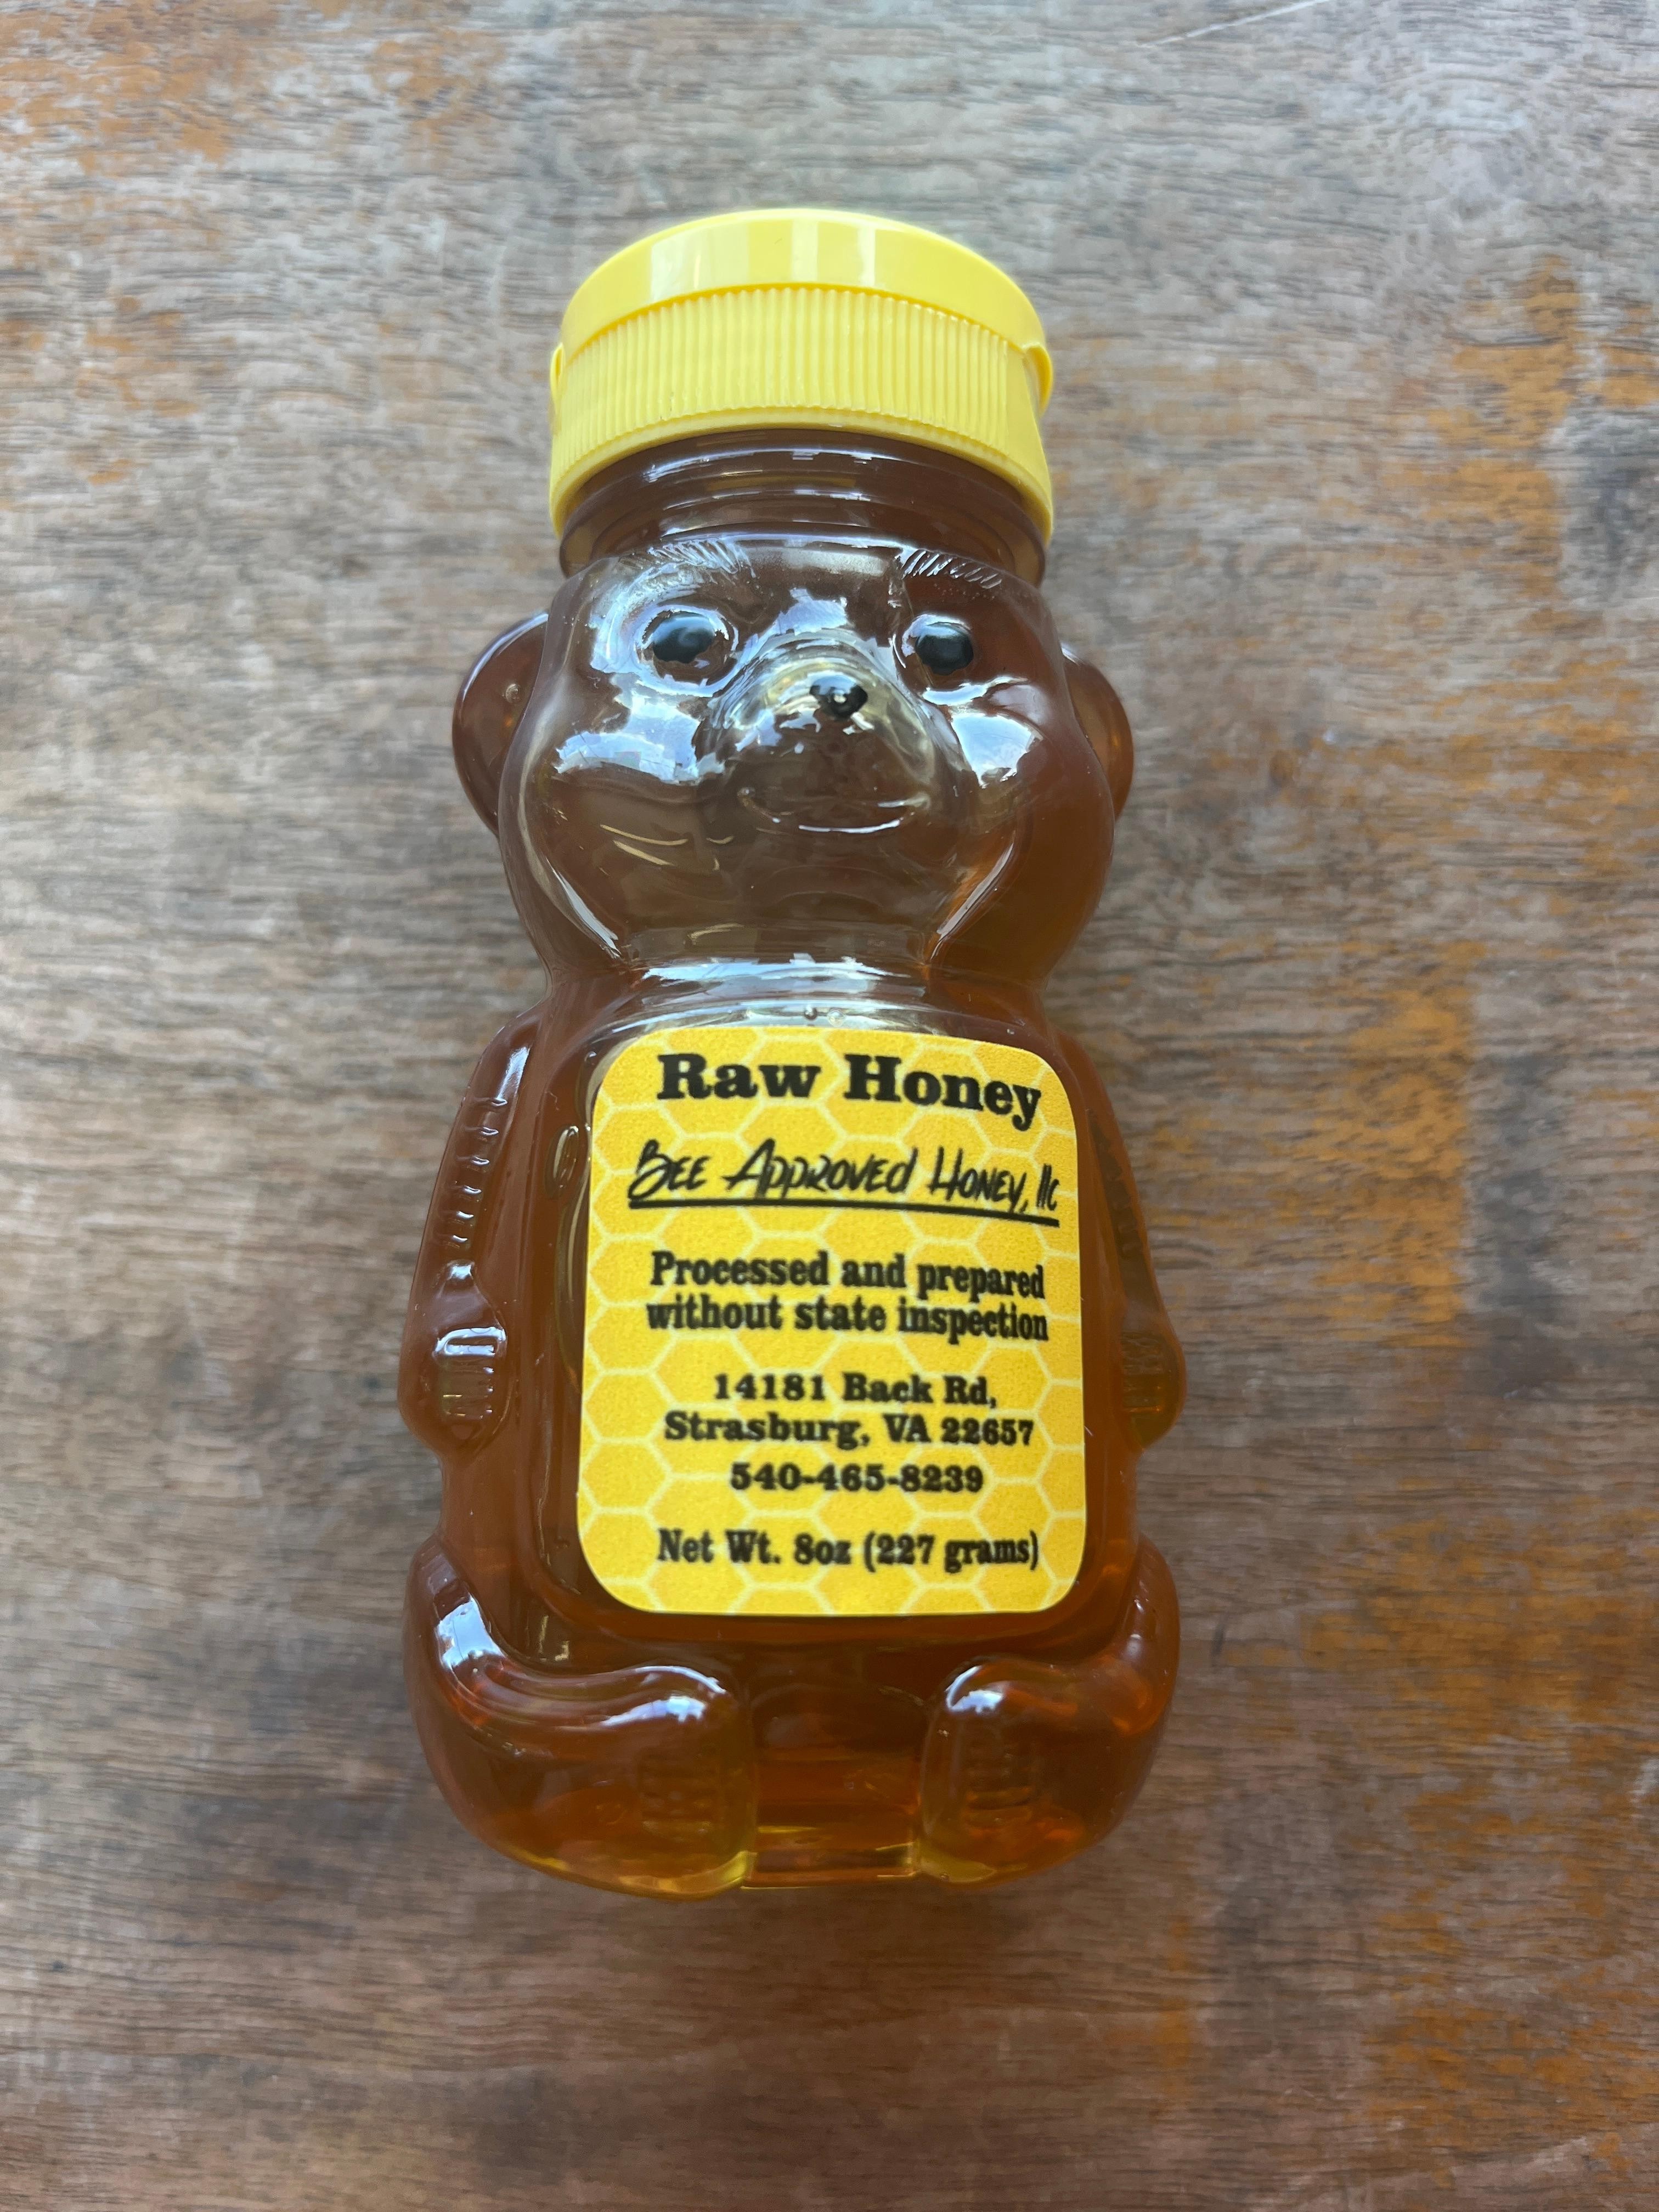 Bee Approved Honey 8oz